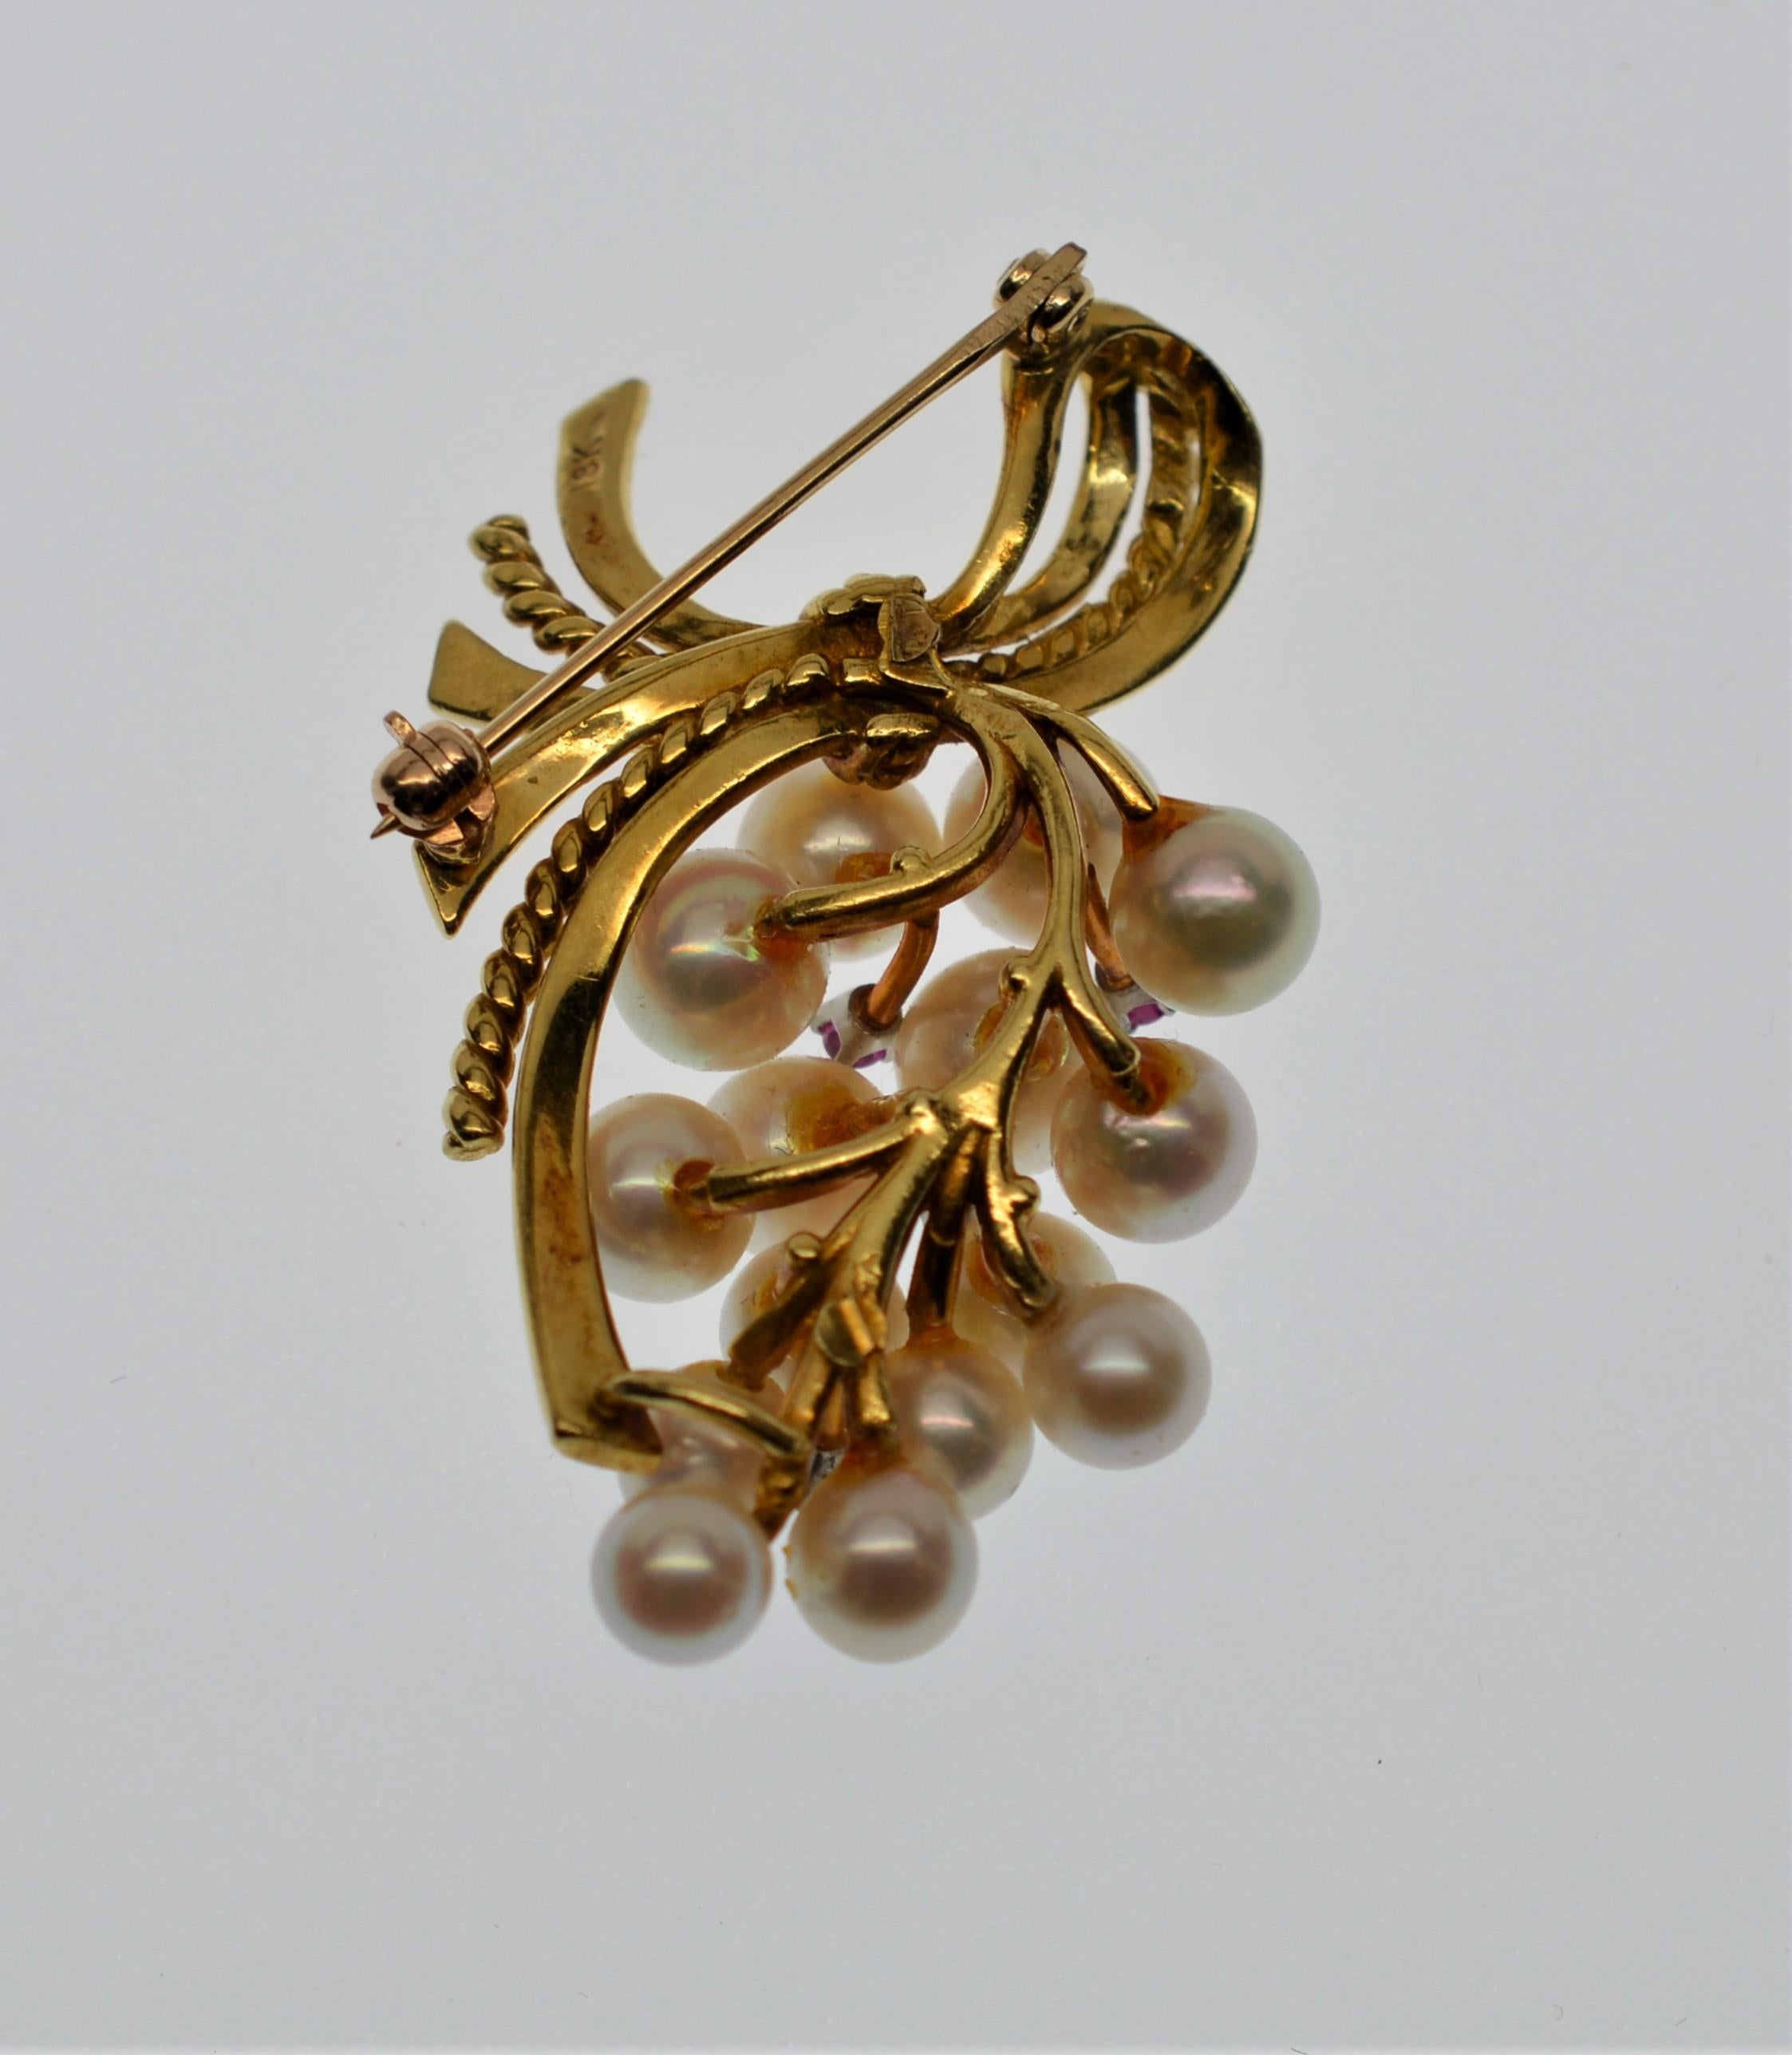 Enjoy this lovely late 1950's eighteen karat (18K) yellow gold brooch with a cascading cluster of lustrous Akoya pearls highlighted with ruby accents artfully gathered by satin eighteen karat gold ribbon.  Attractively arranged AAA pearls range in